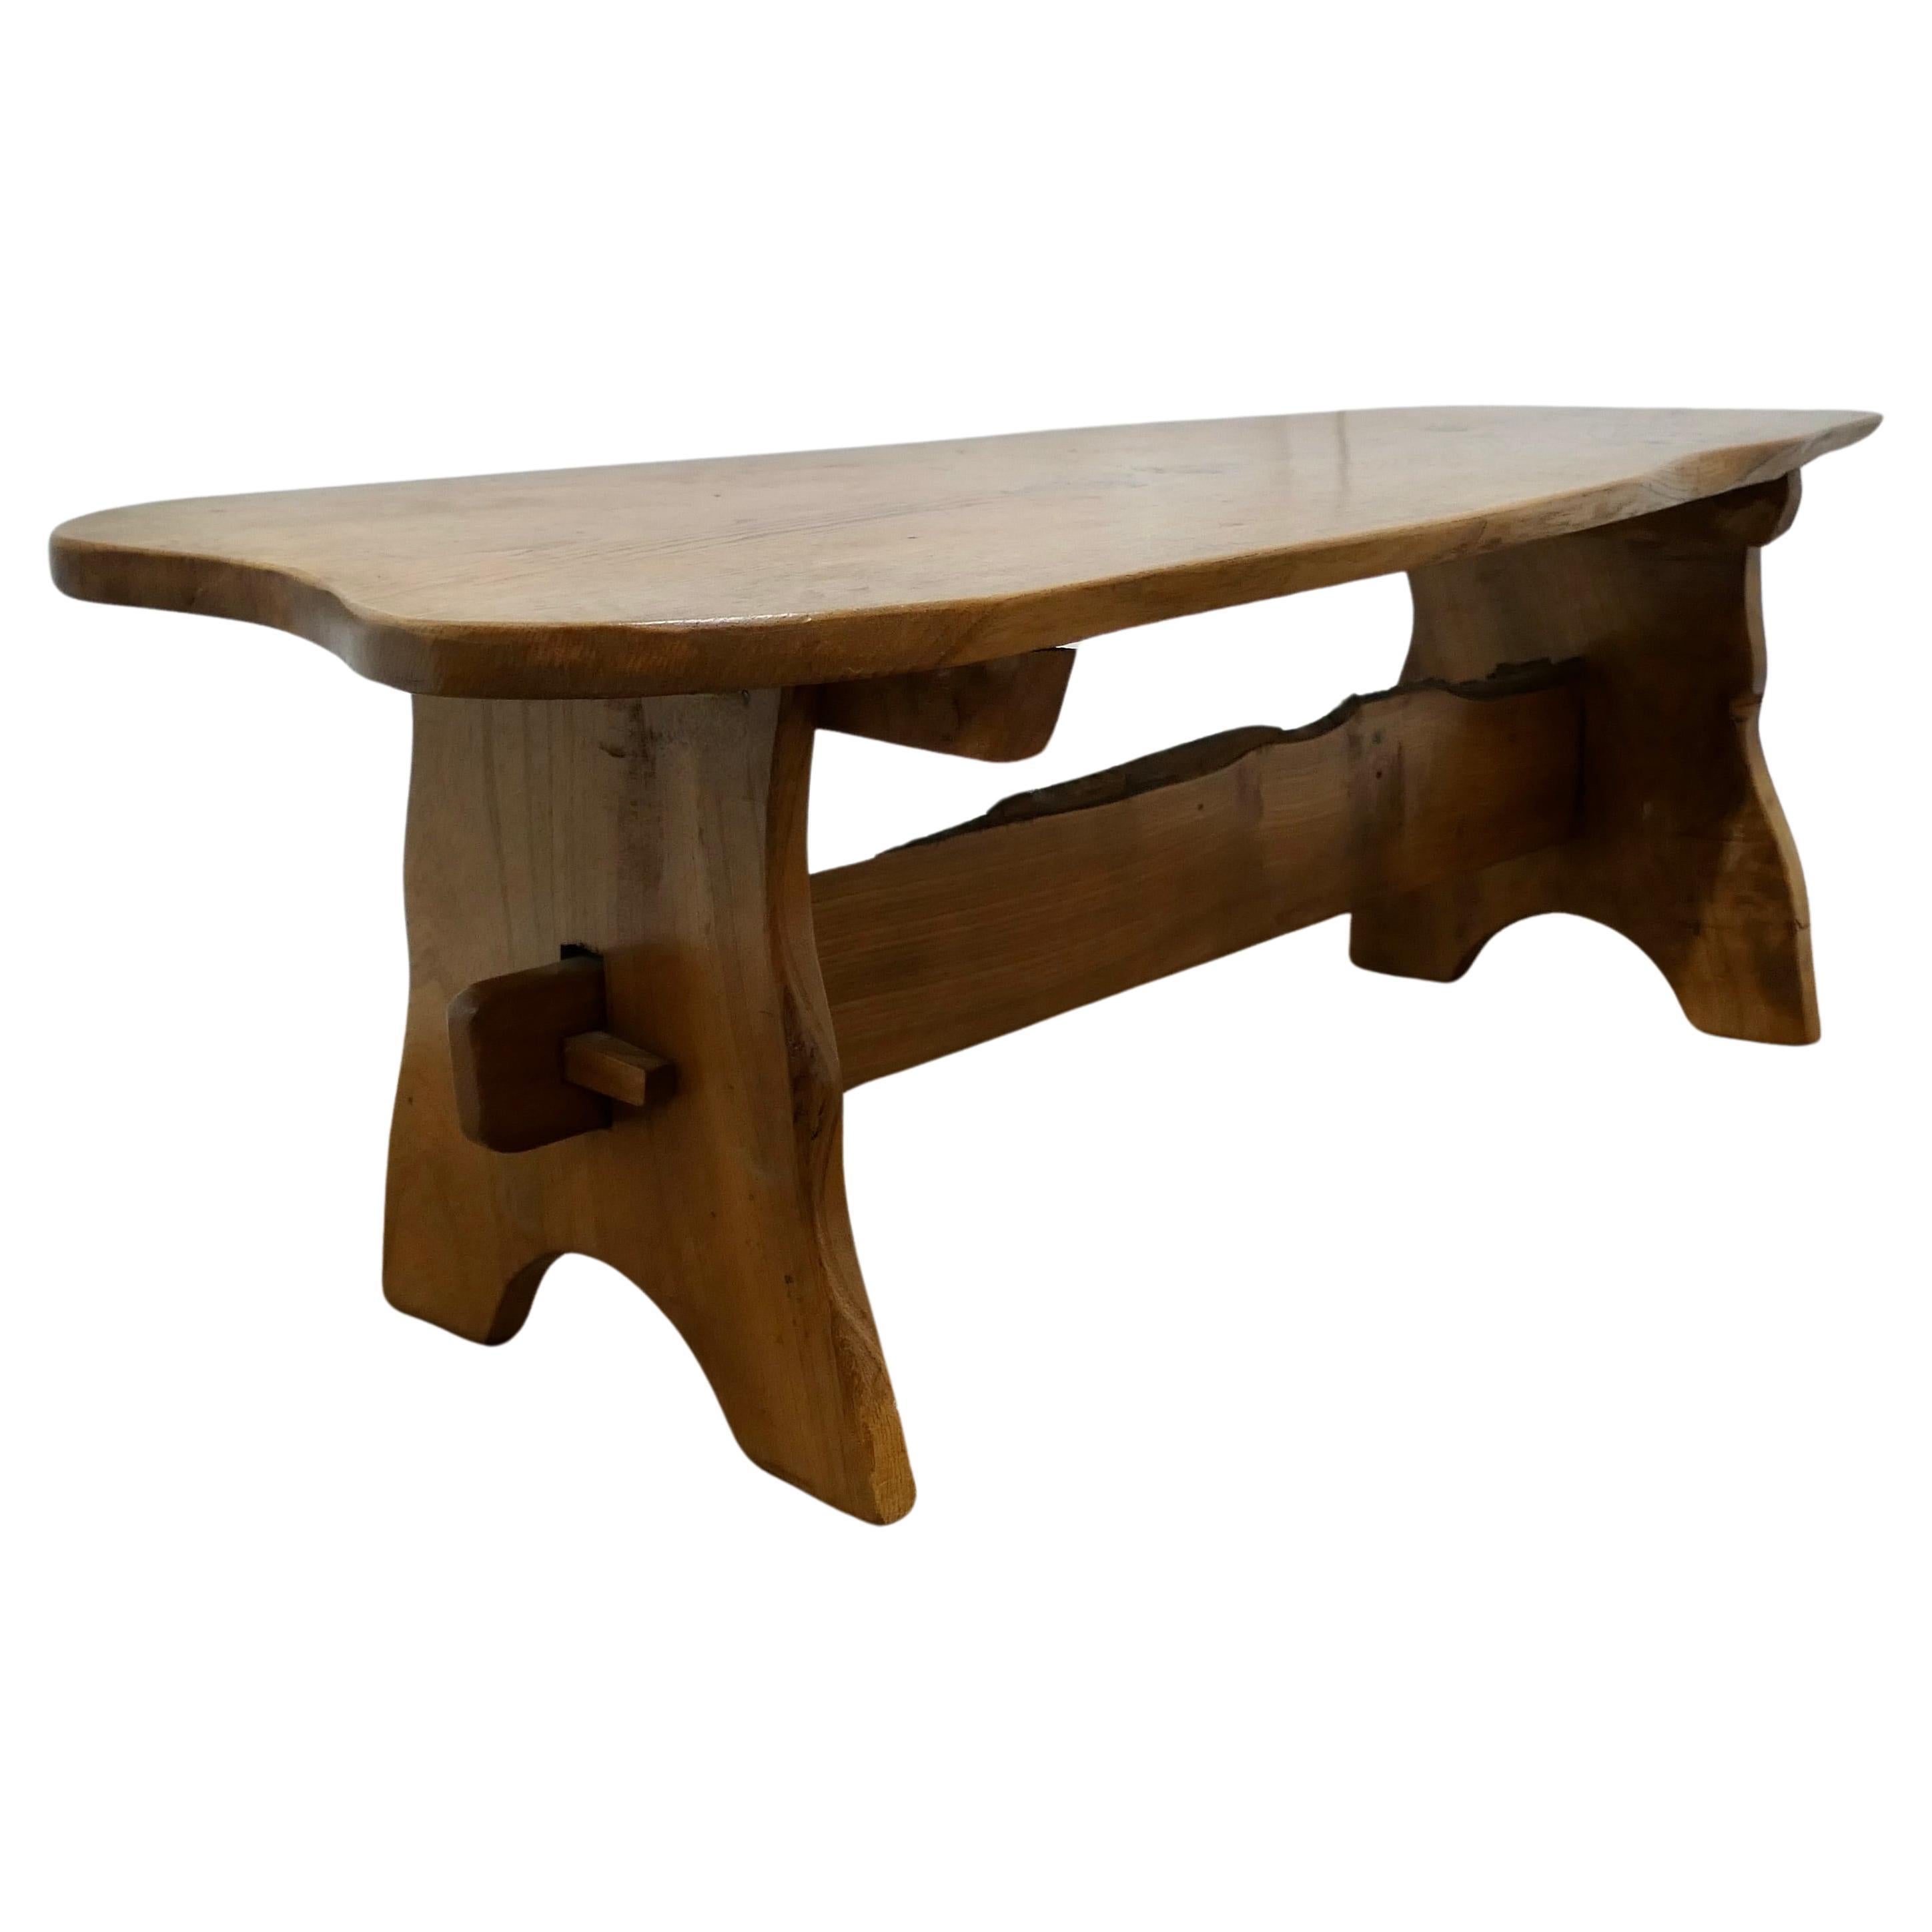 Country Elm Refectory Coffee Table  This is a good sturdy country made table, it For Sale